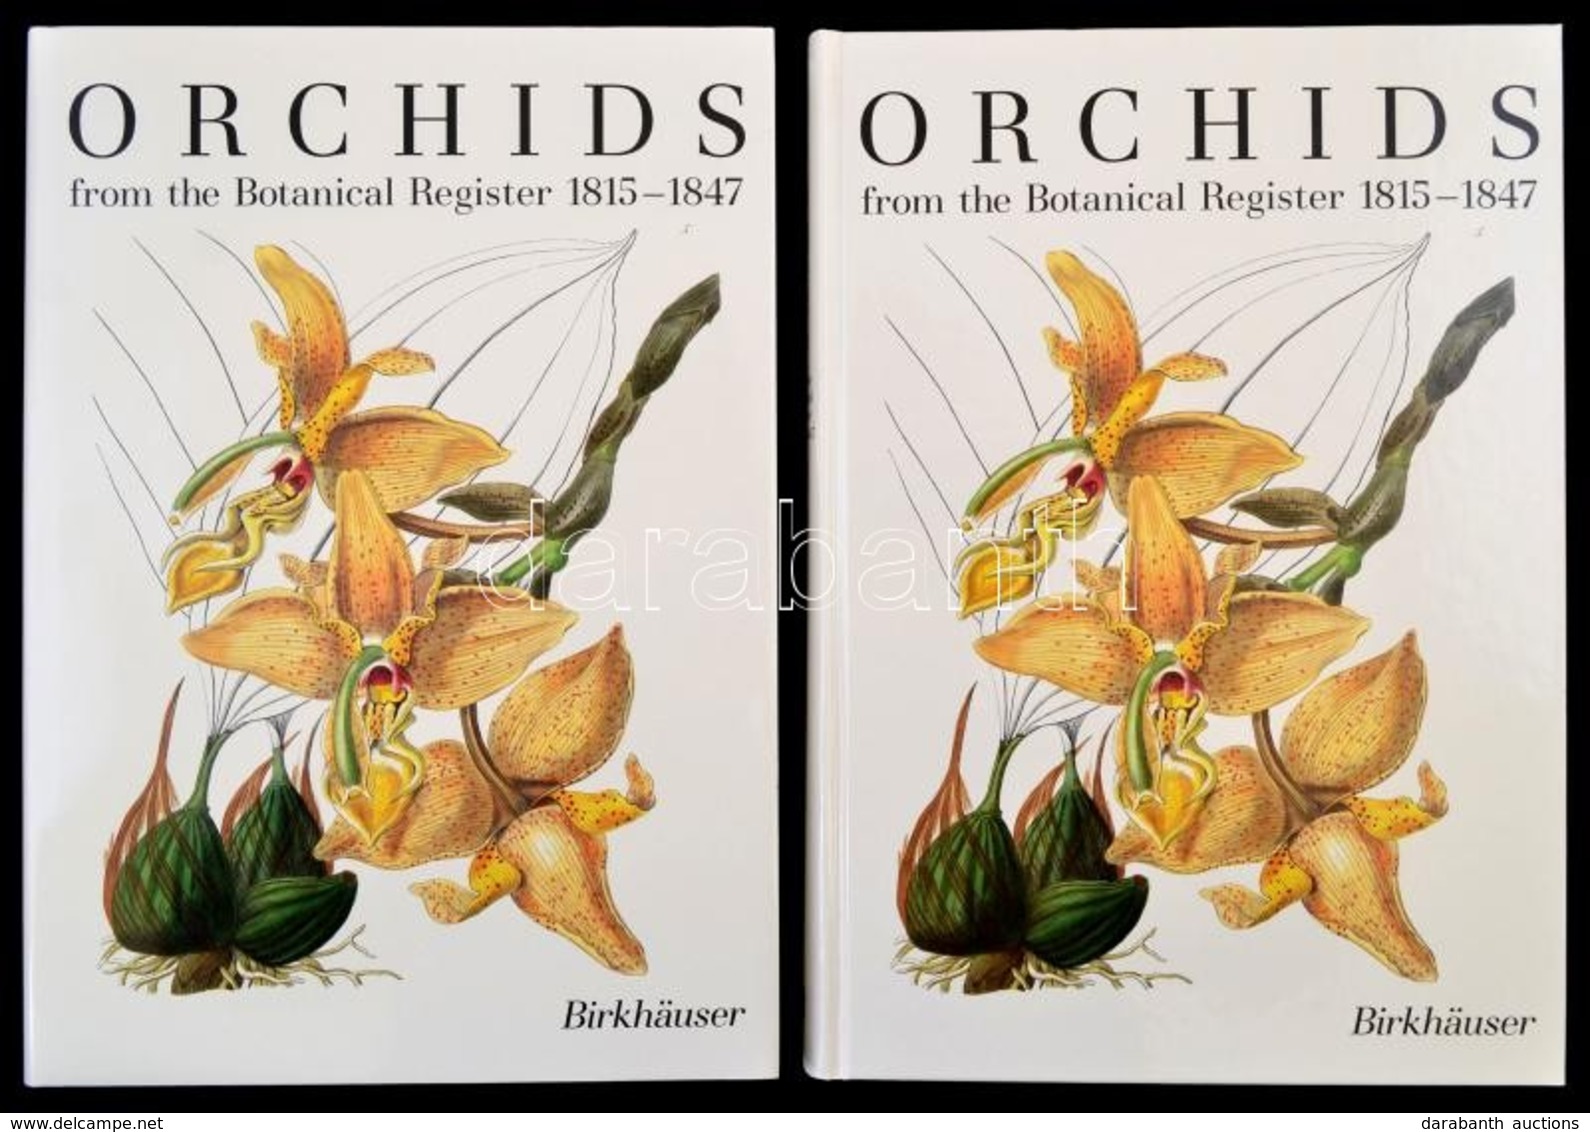 Orchids From The Botanical Register 1815-1847. I-II. Koetet. I. Koetet. The Text. II. Koetet. The Illustrations. Basel-B - Unclassified